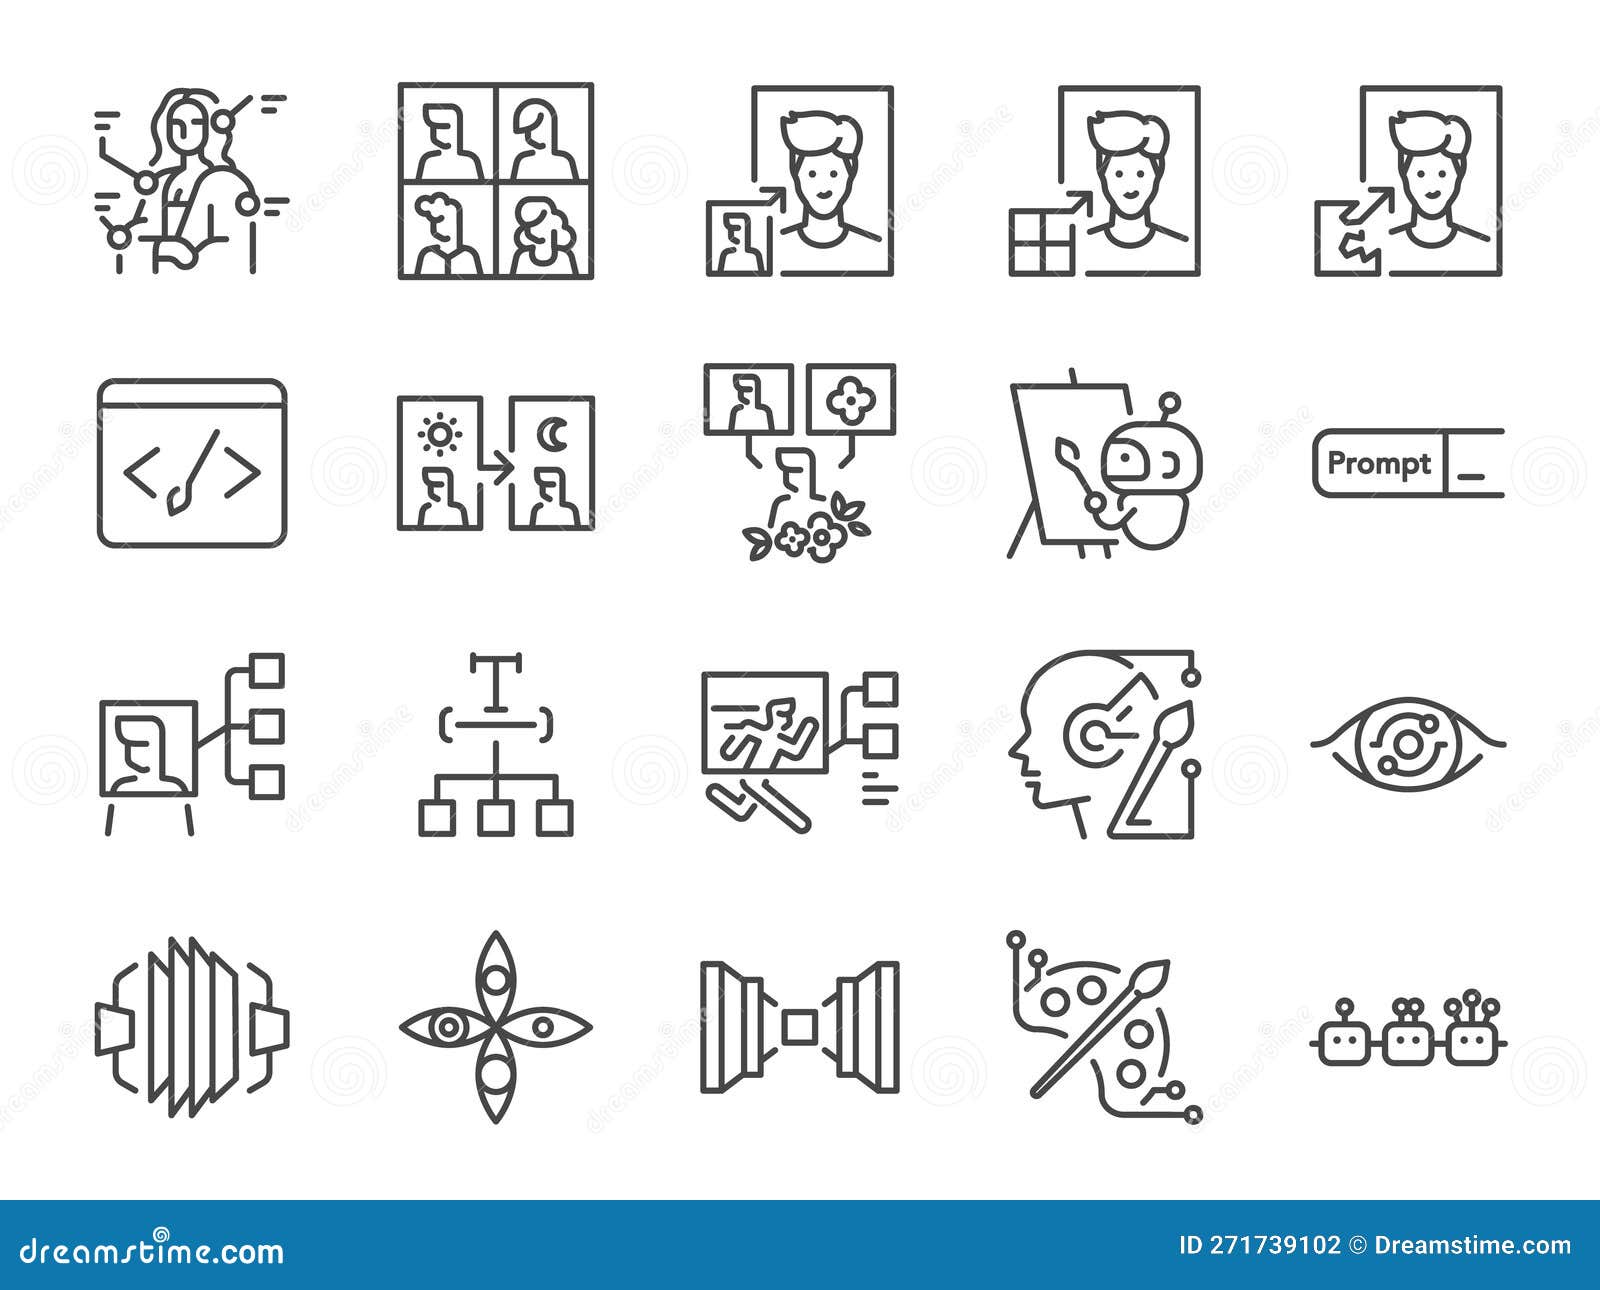 ai image generator icon set. it included icons such asÂ artificial intelligence, art, textual technology, and more.